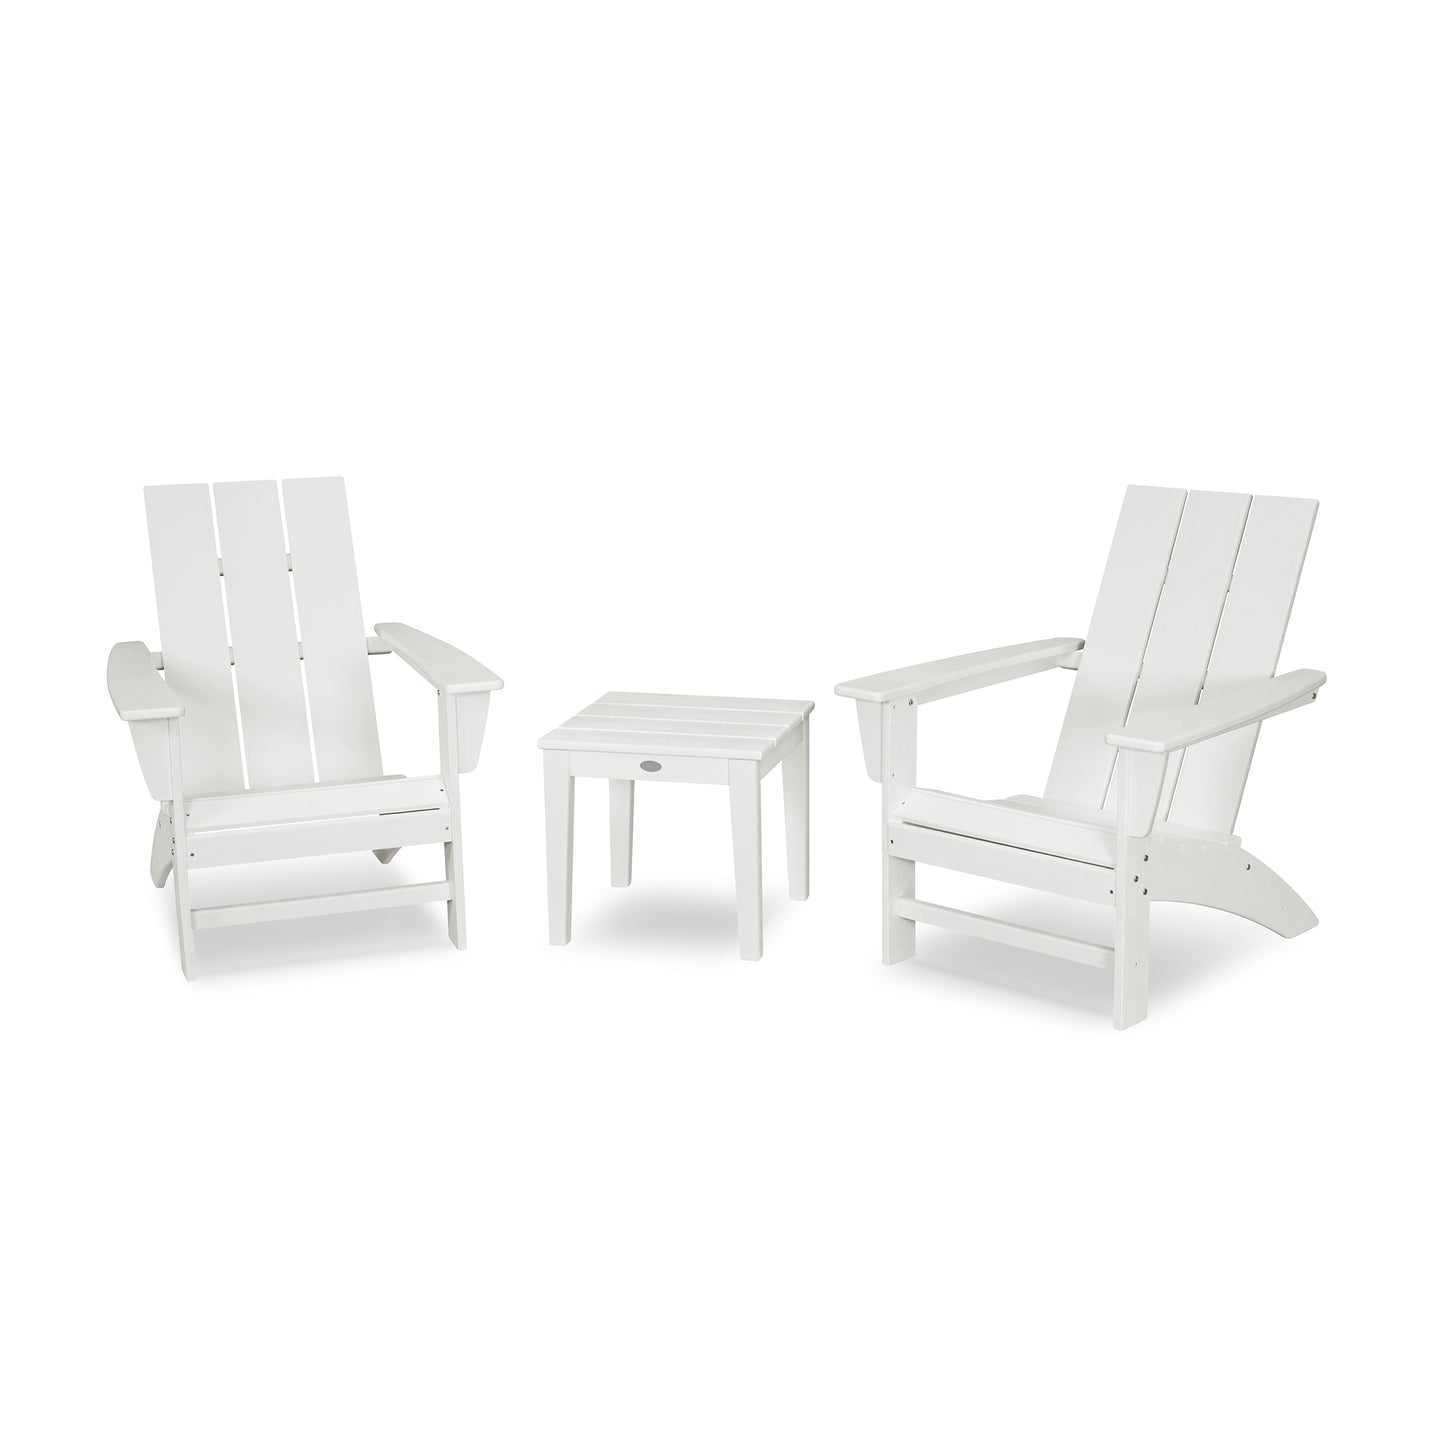 Two white POLYWOOD Modern Adirondack Chairs made of POLYWOOD® lumber, positioned facing forward with a small matching side table between them, set against a plain white background.